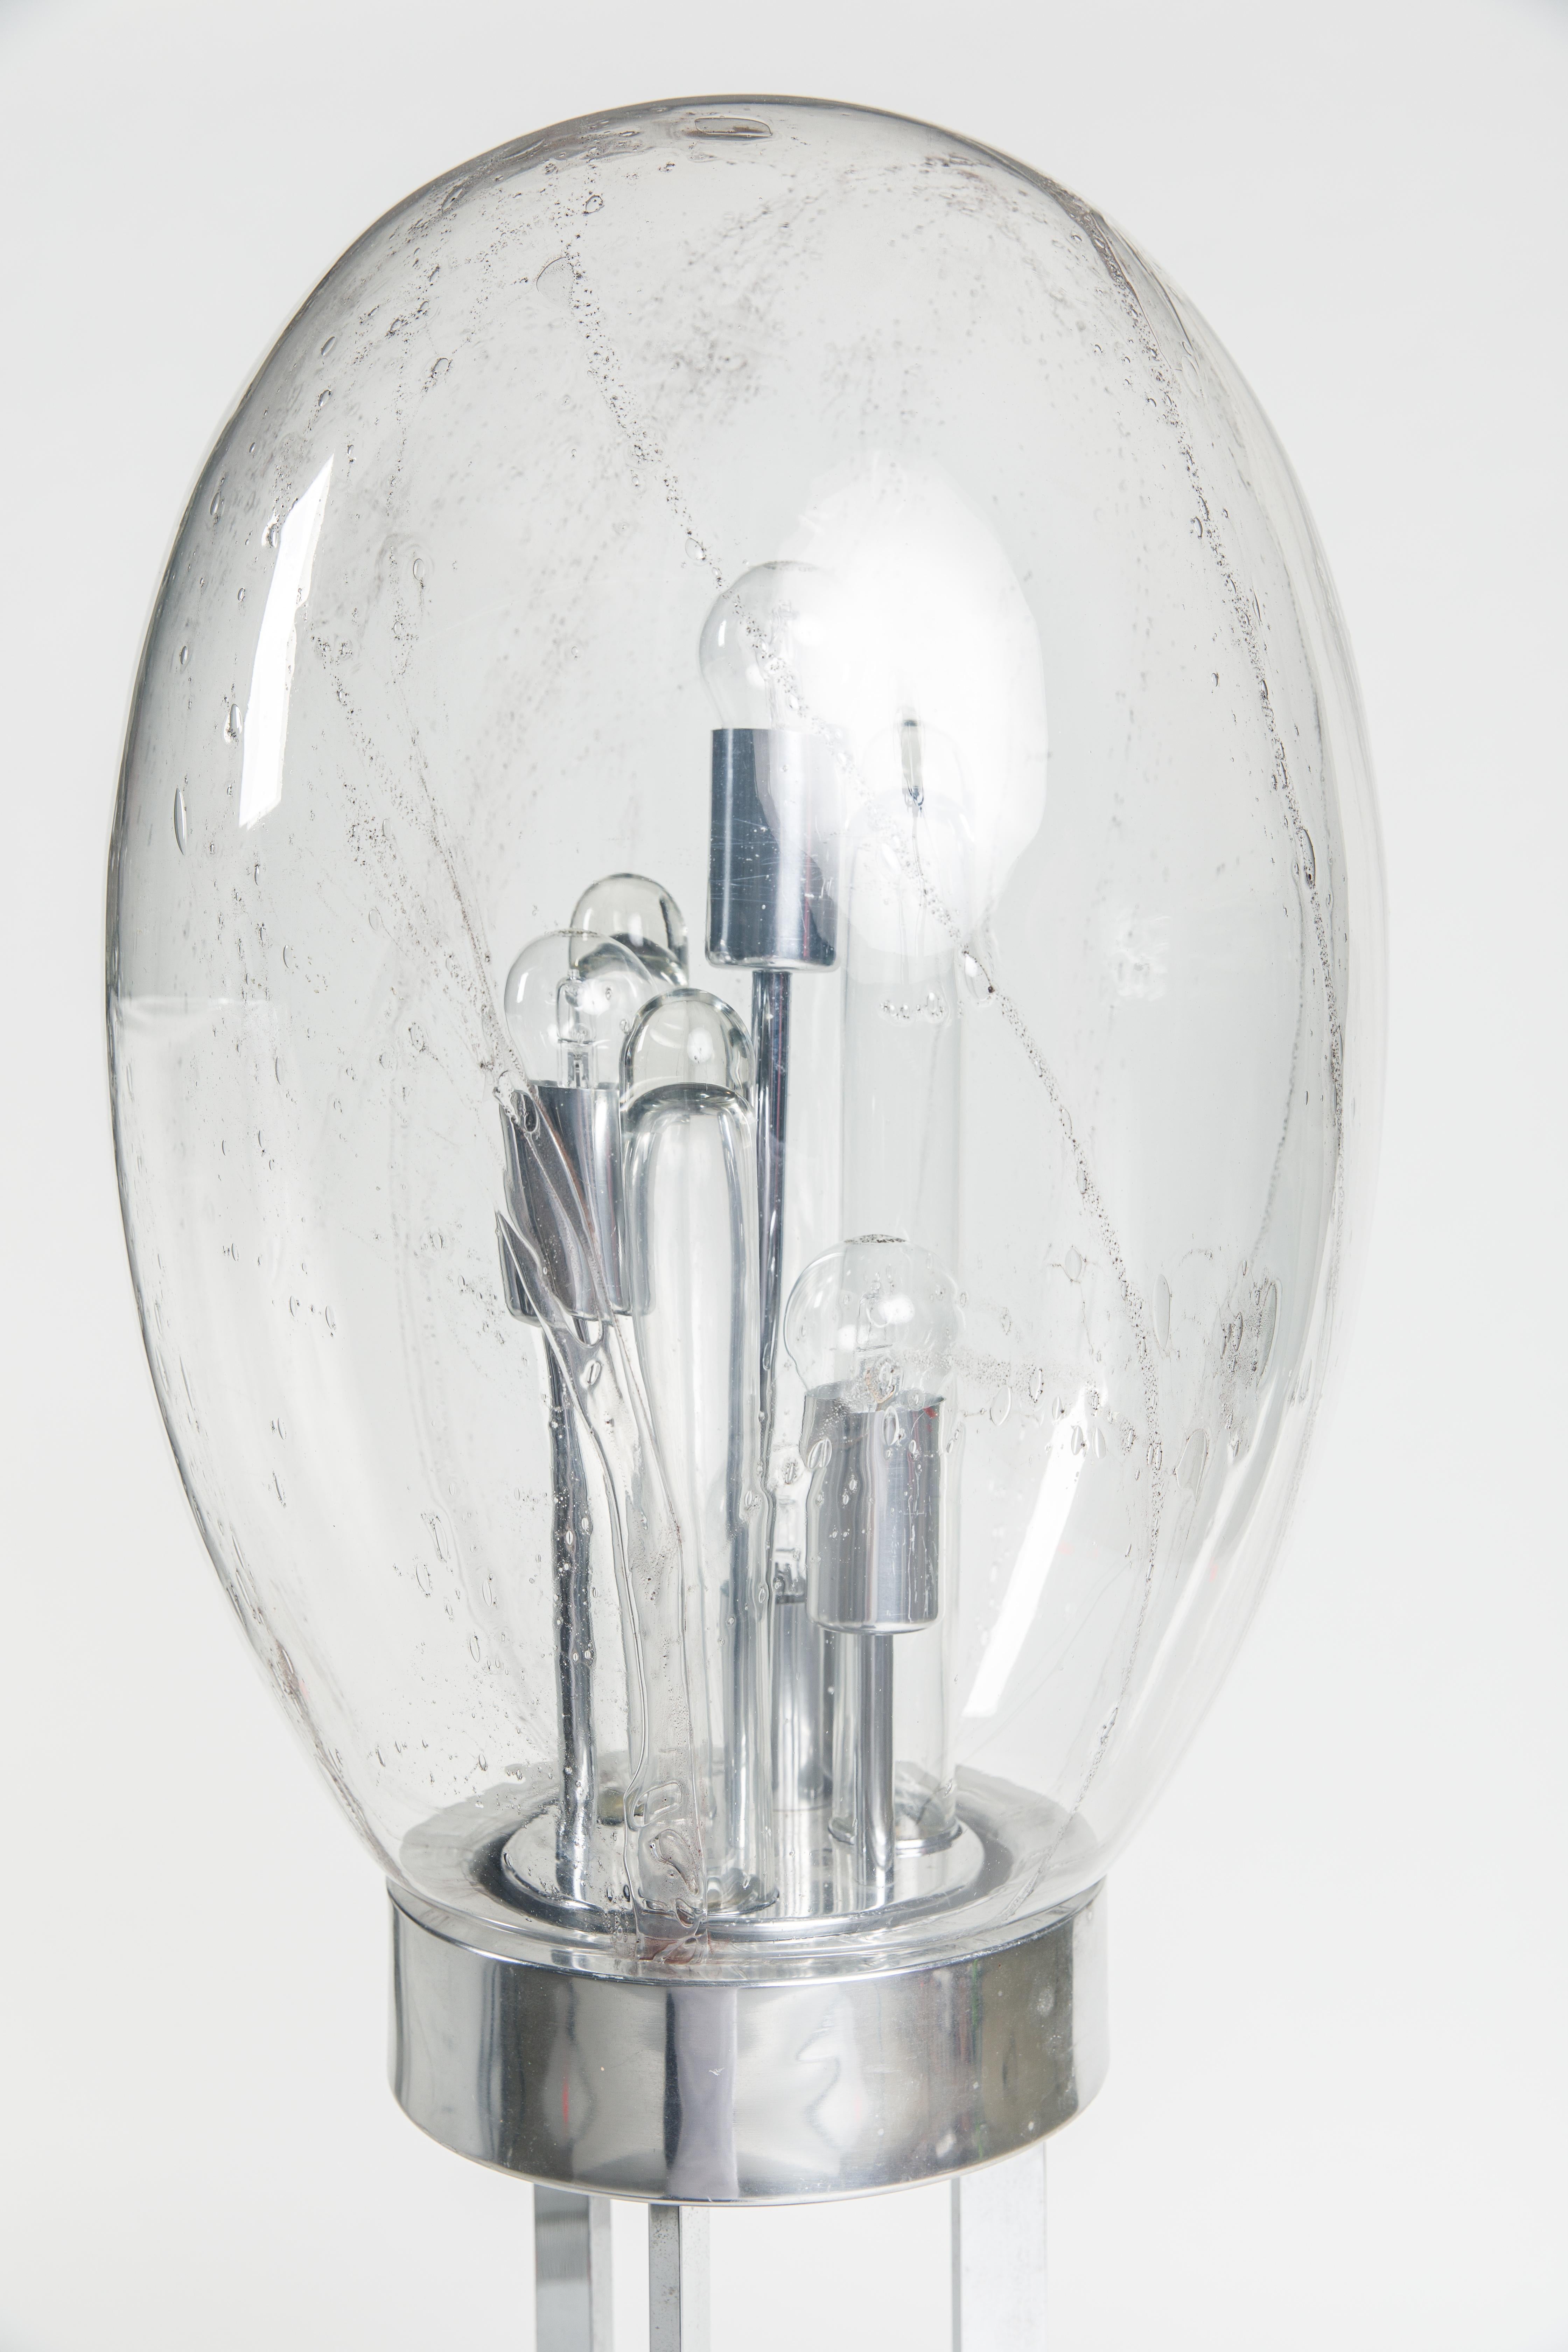 Floor lamp from 1960s-1970s, made by Doria from Germany.
Chromed metal stand construction, oval spherical clear glass diffuser with bladder inclusions, inside four burners and three glass tubes. Labeled on the underside.
Measures: D. 35cm, H.